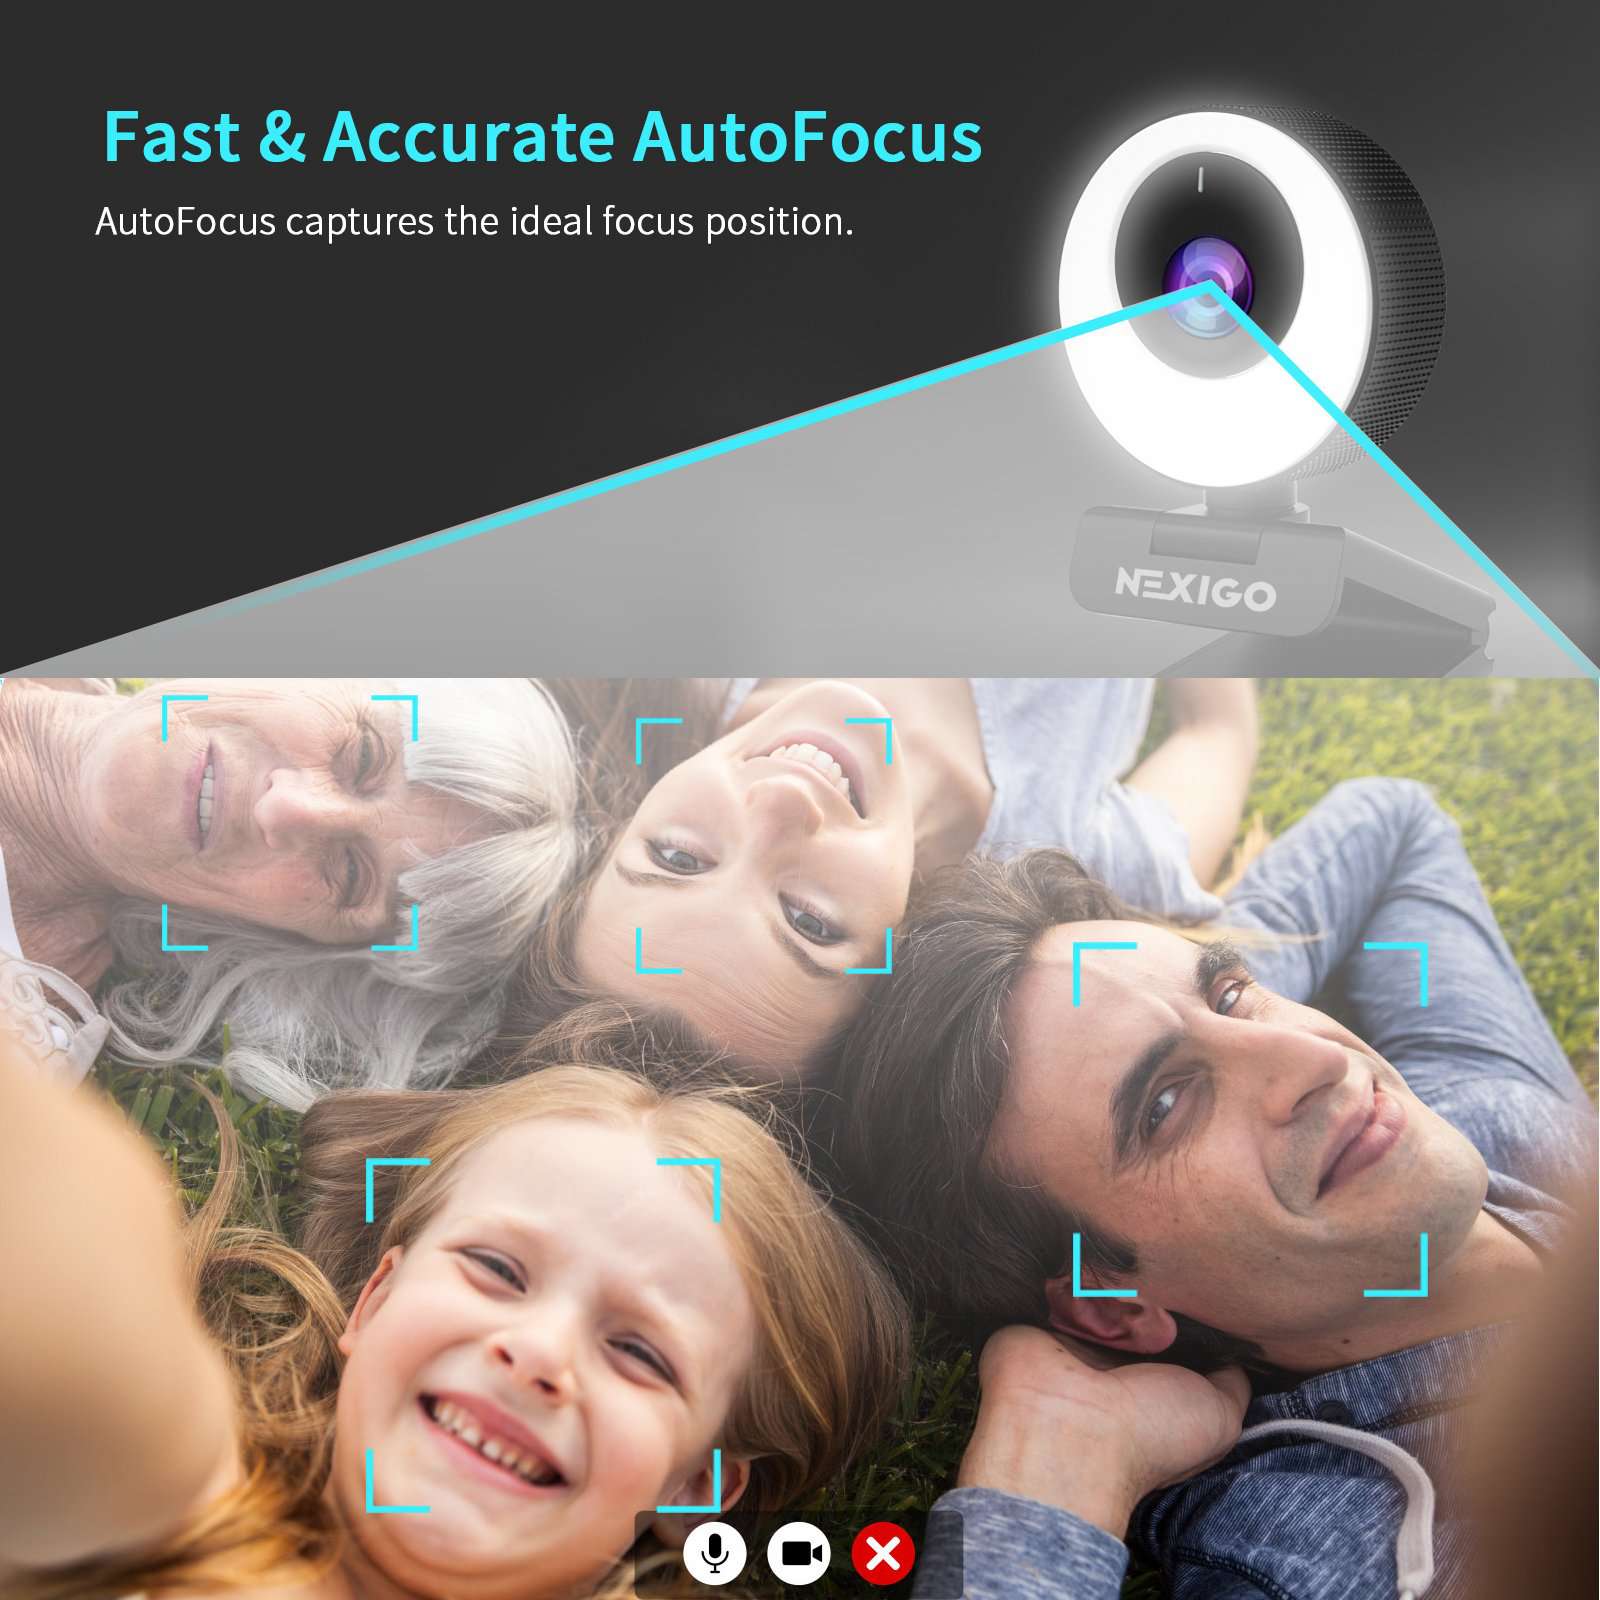 When a group of people use the N620E for video chatting, it can accurately autofocus on faces.